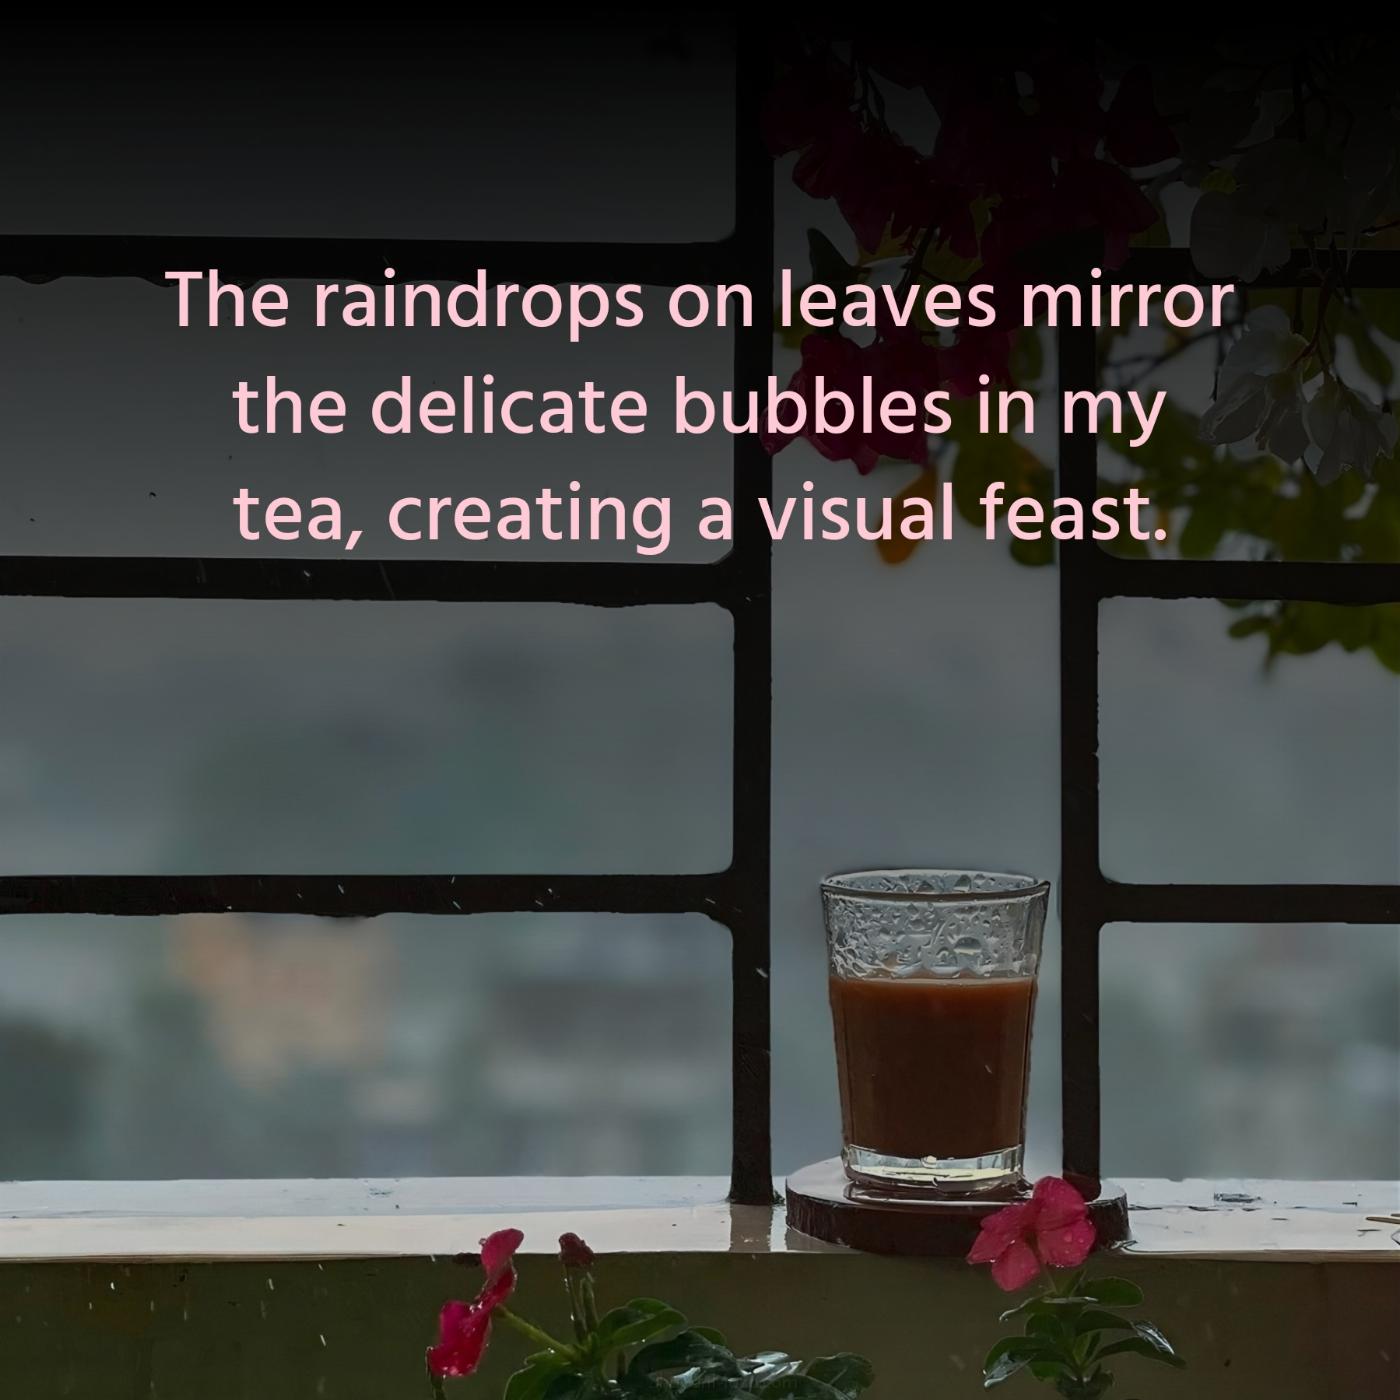 The raindrops on leaves mirror the delicate bubbles in my tea